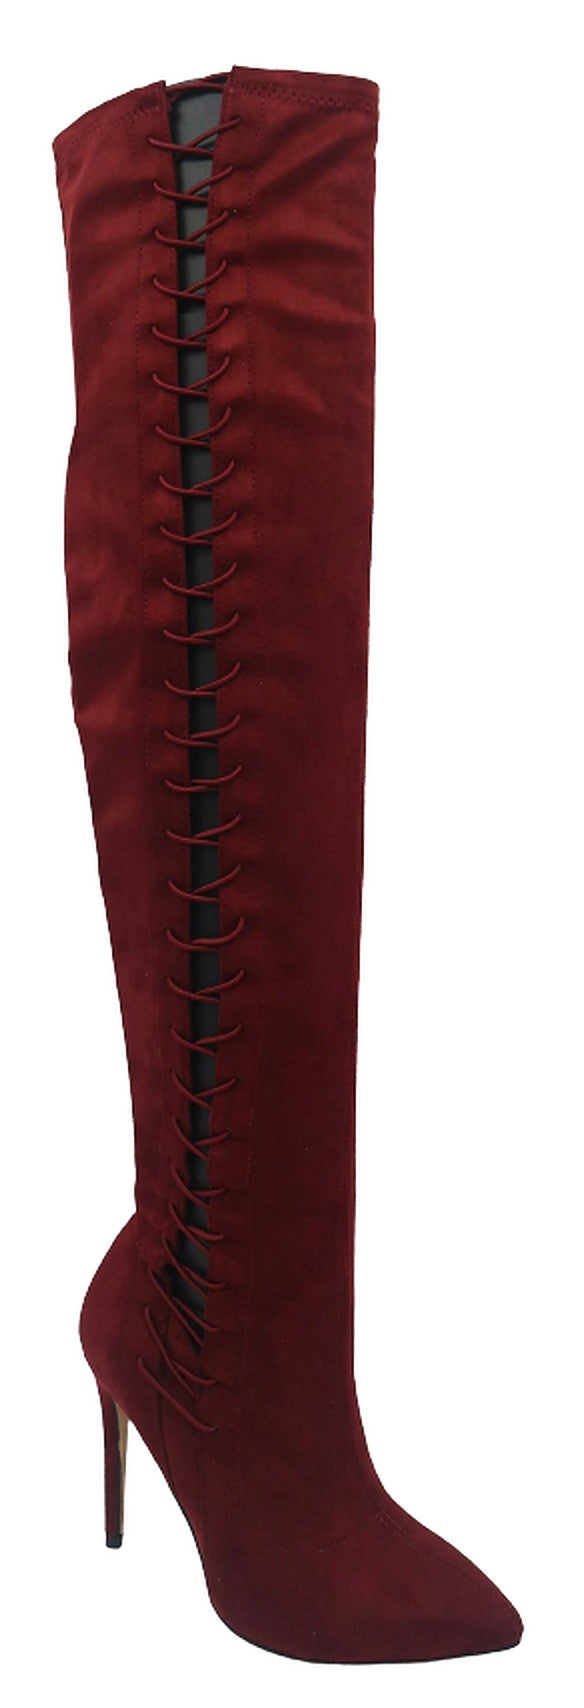 Pointy Toe Stiletto High Heel Over The Knee boots Hibiscus-58 By Anne Michelle